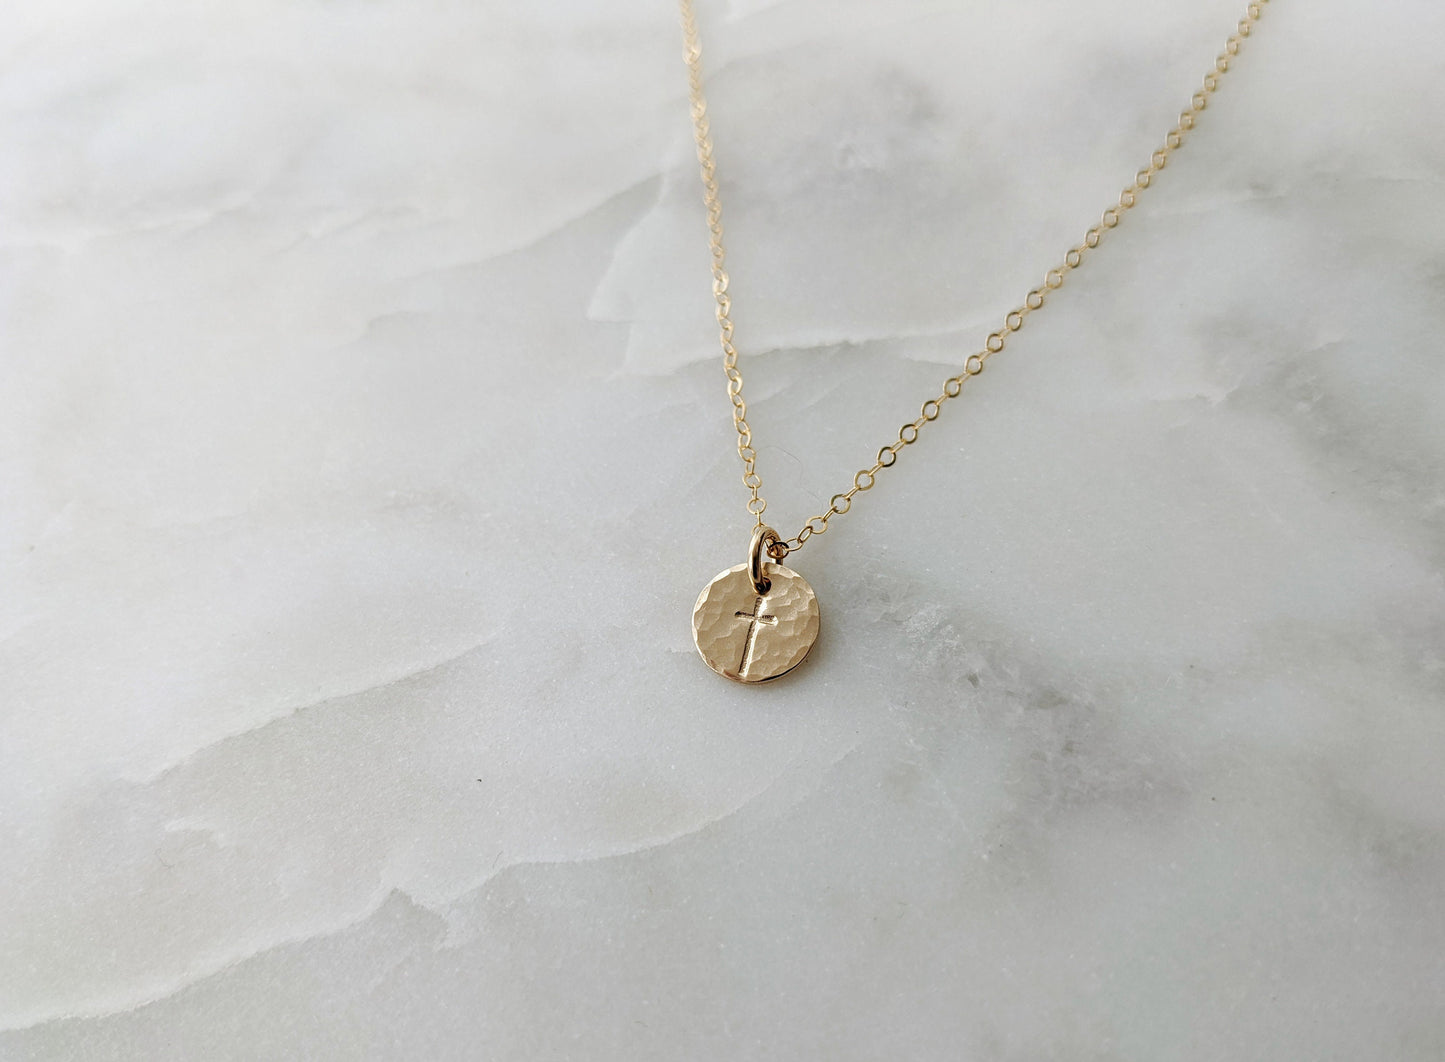 Gold Cross Necklace | Dainty Cross | Tiny Gold Disc | Minimal Jewelry | The Stamped Life